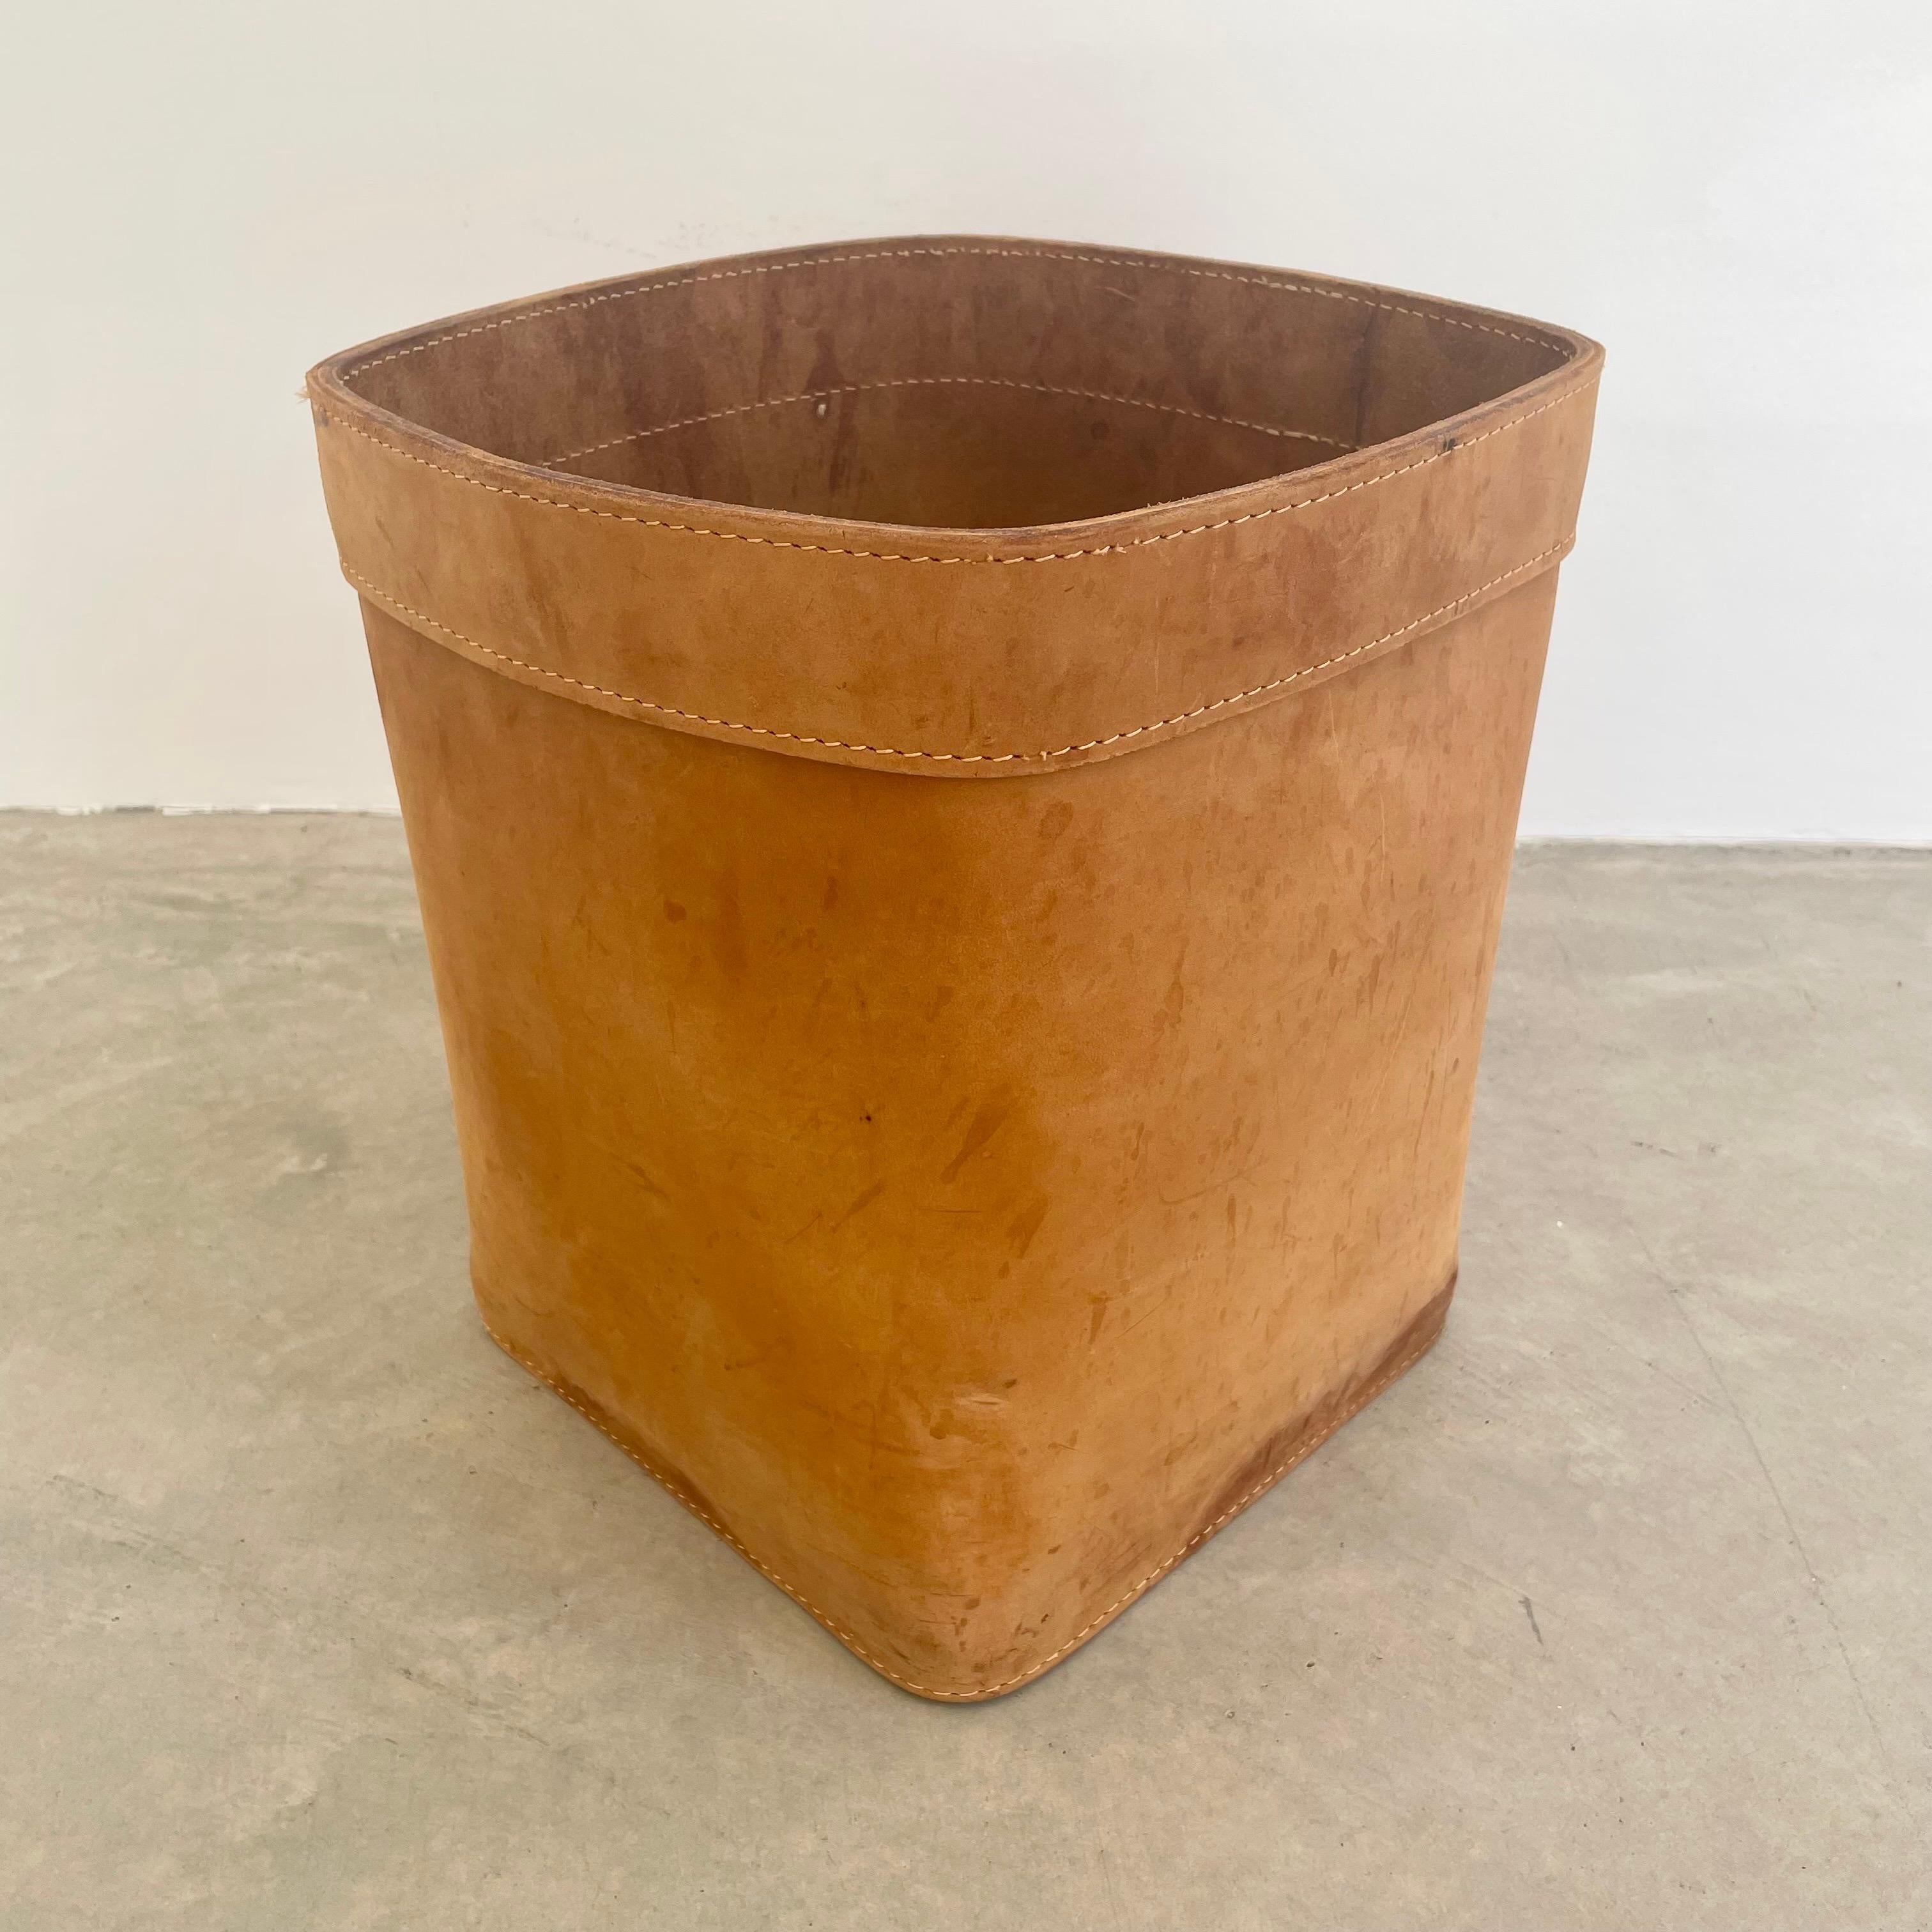 Substantial tan saddle leather waste bin in the style of Jacques Adnet. Circa 1960s. Handmade and hand-sewn from thick top hide leather in a cube shape with a leather base. In good condition with nice patina on the leather. Great color and age.